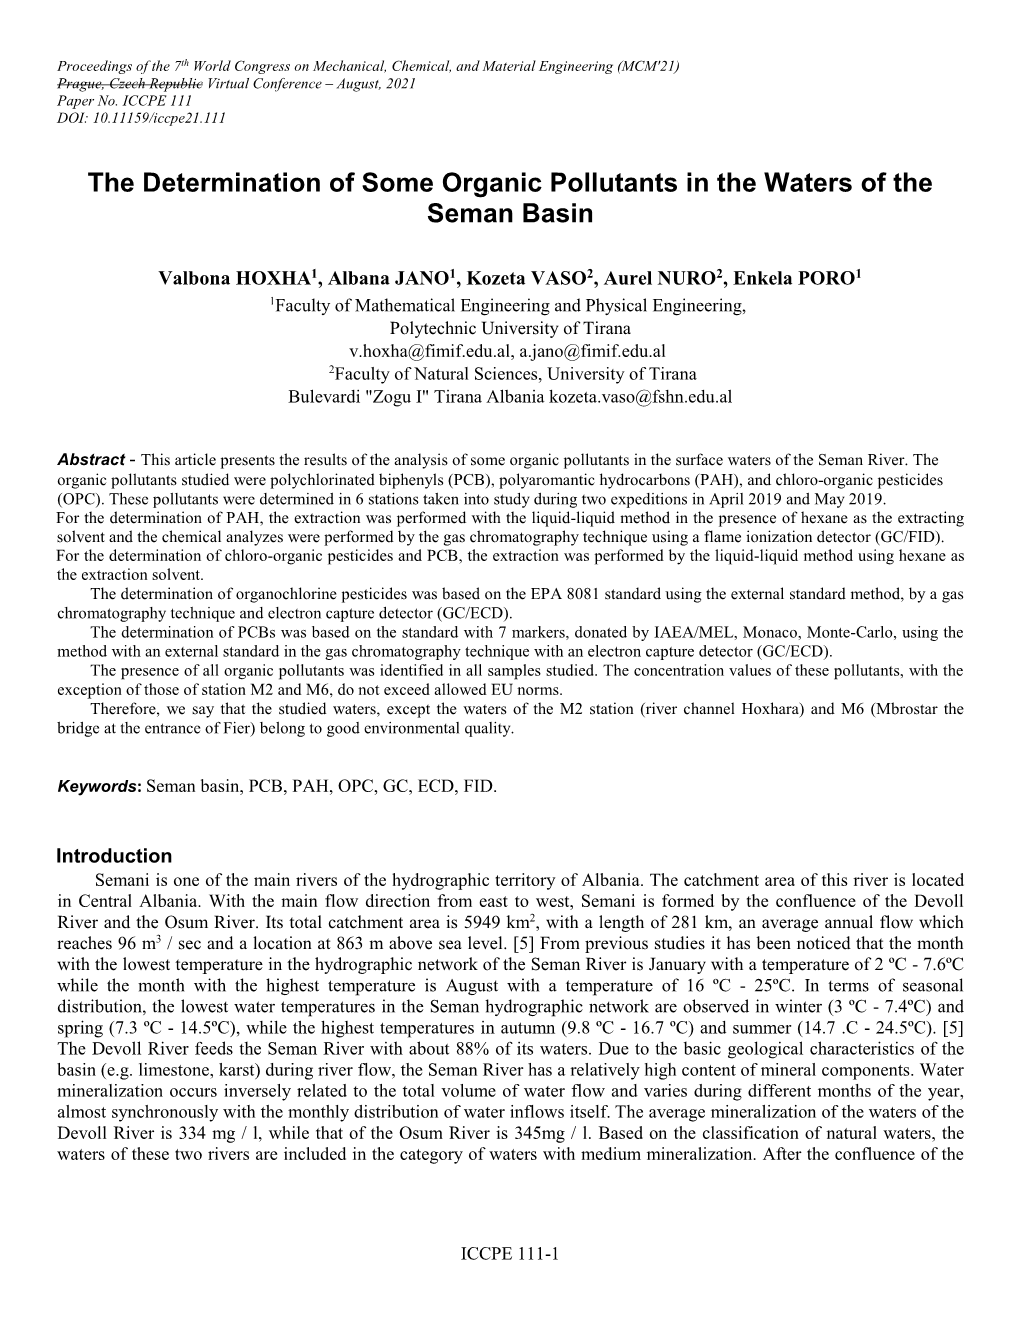 The Determination of Some Organic Pollutants in the Waters of the Seman Basin